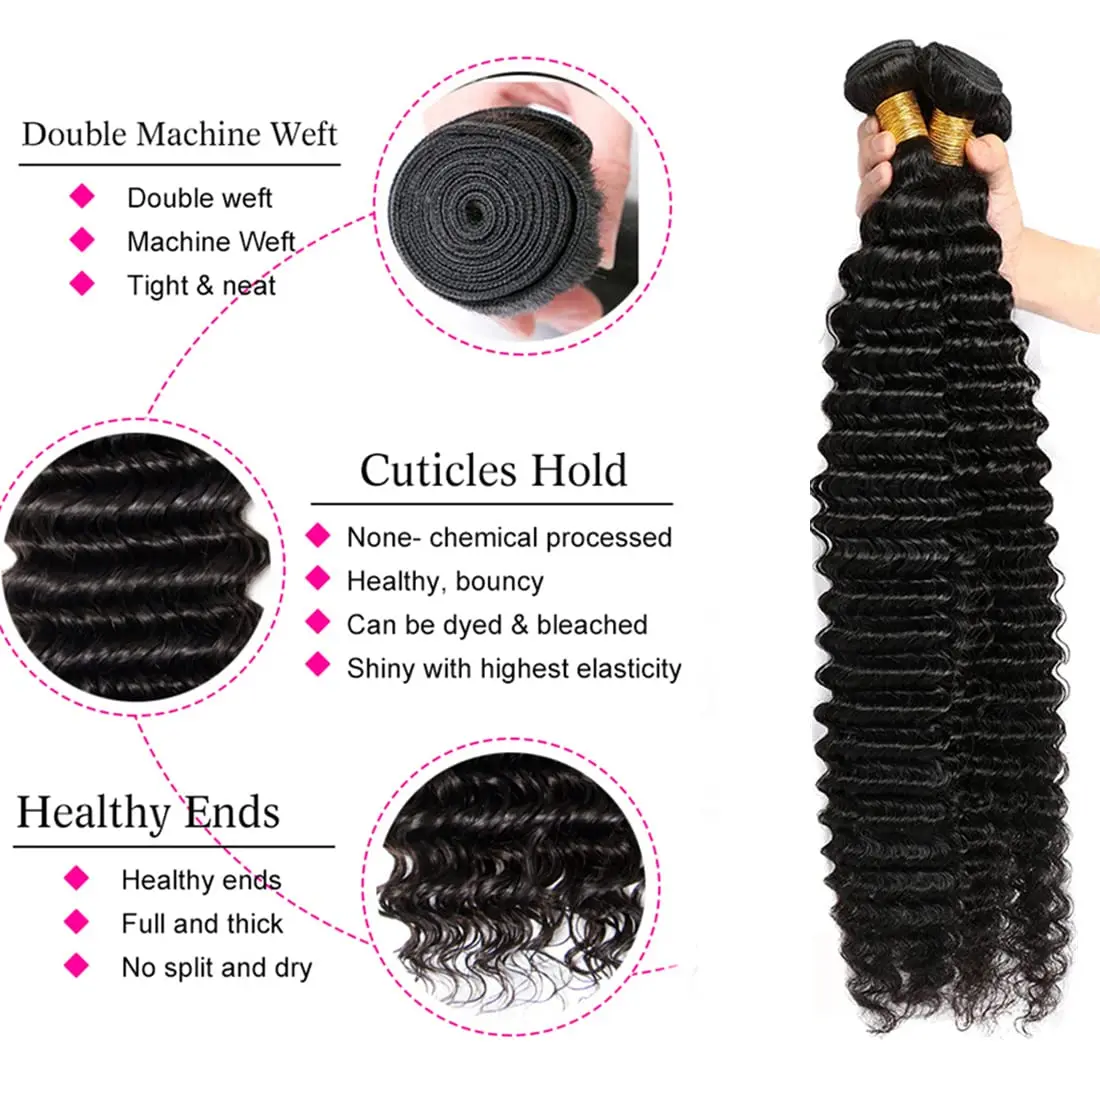 Deep Wave Bundles Human Hair With Closure Curly Brazilian Hair Weave 3/4 Bundles With HD Lace Frontal Closure Hair Extensions